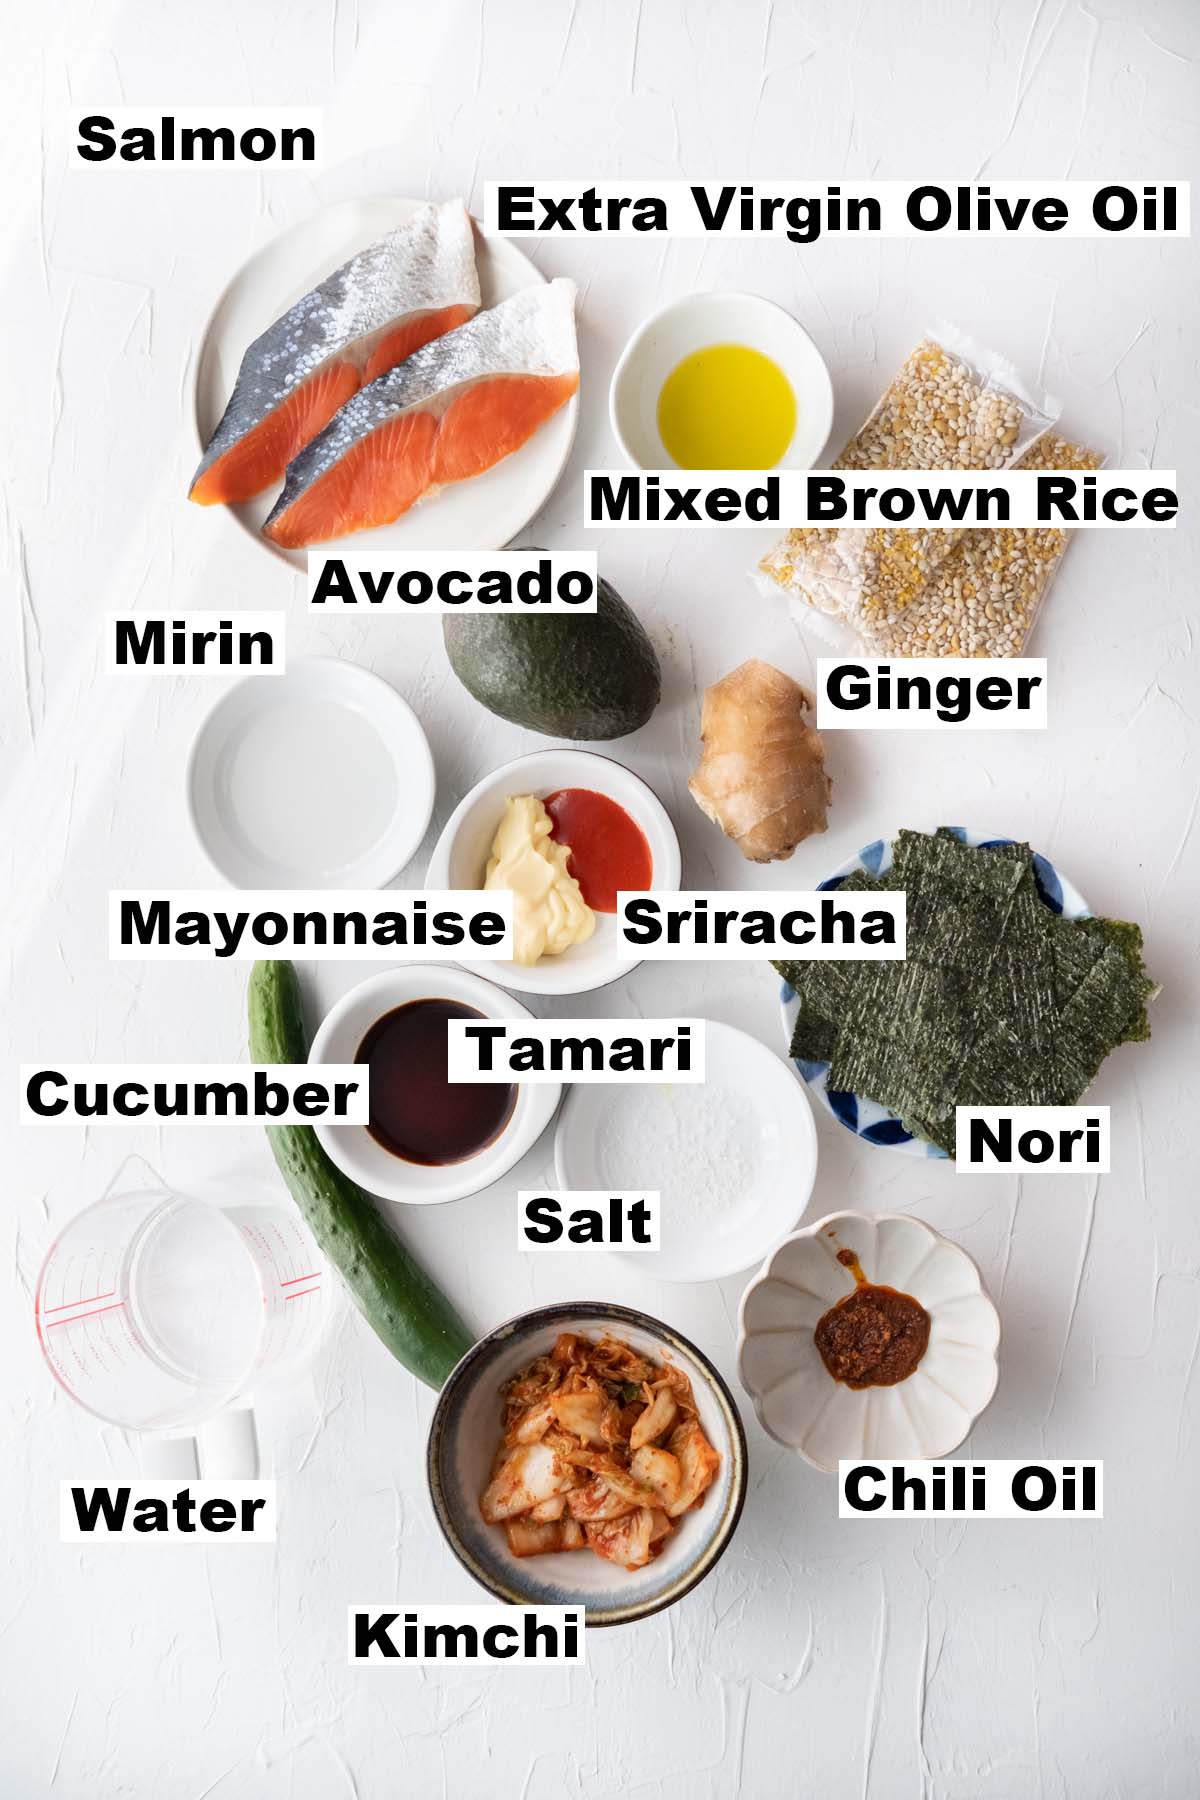 Picture showing ingredients used for the salmon rice bowl recipe.